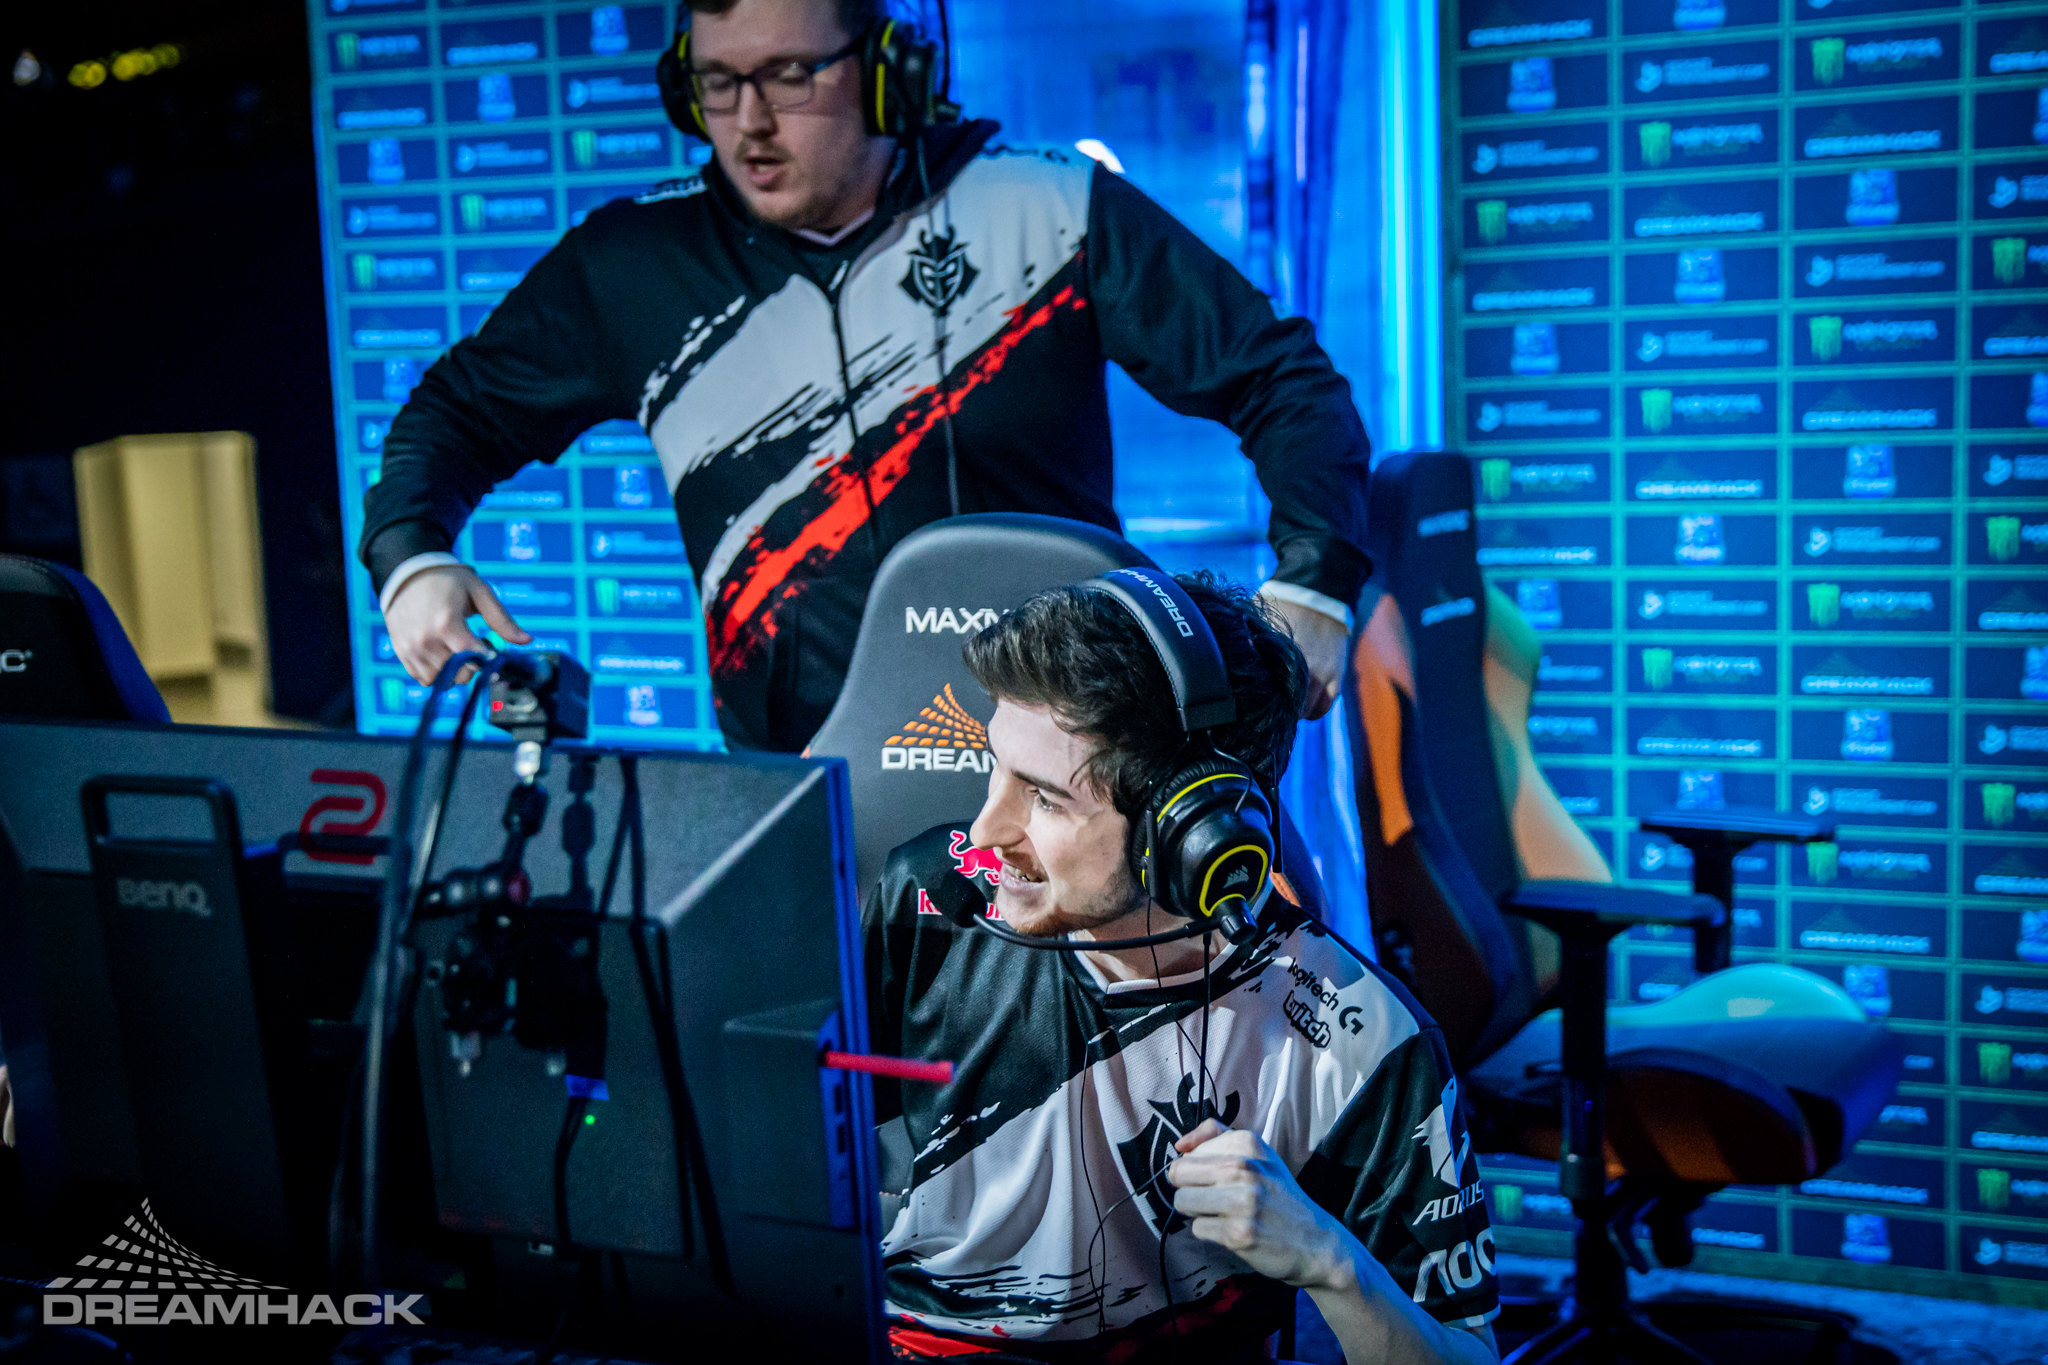 G2 Rizzo retires from Rocket League esports, Spring Split will be his last